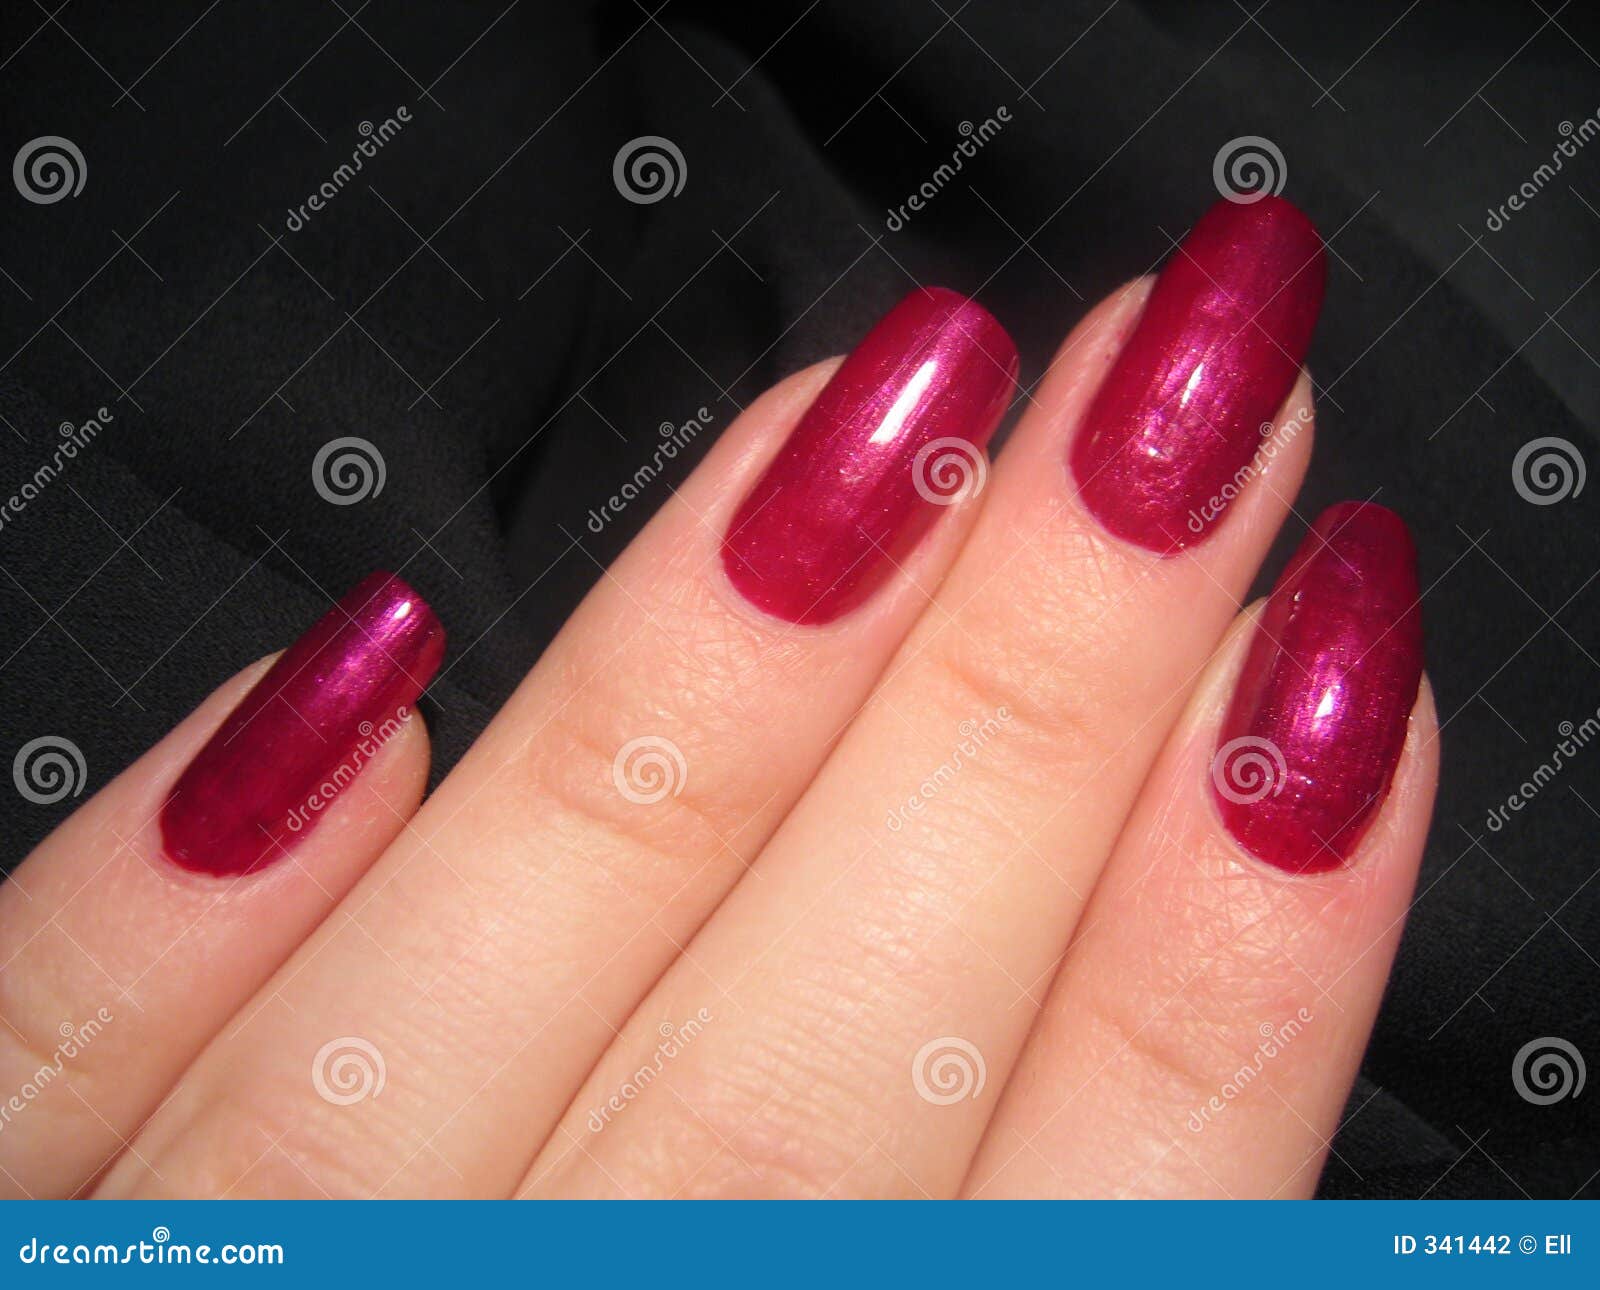 Red nails stock photo. Image of nail, fingers, nails, girl - 341442